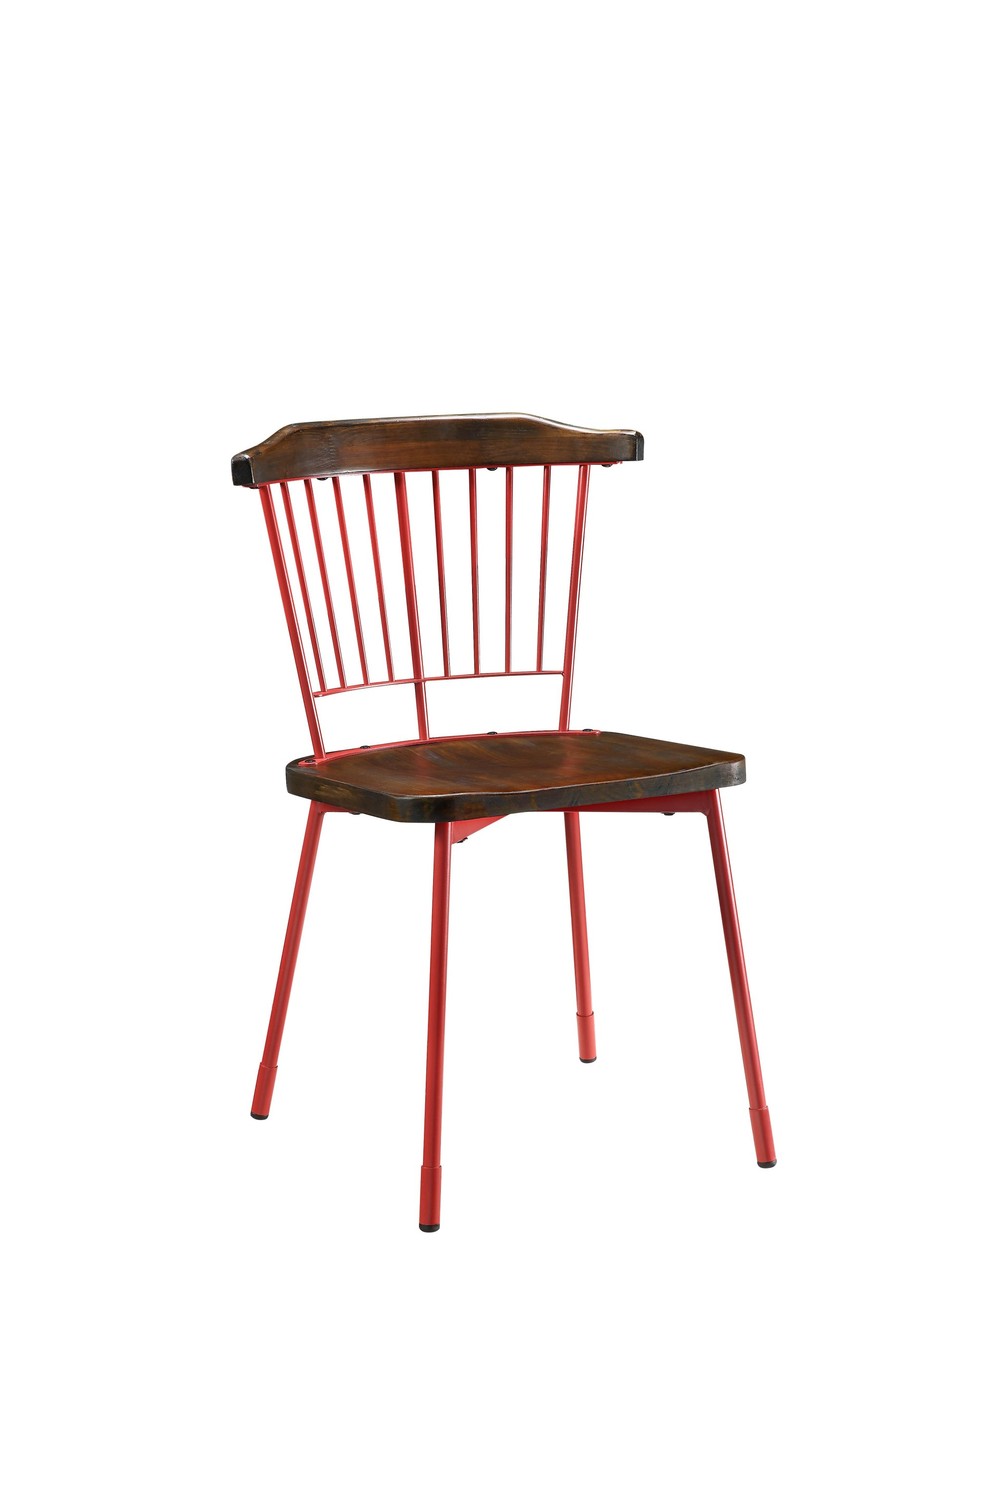 21" X 19" X 32" Brown Oak Wood and Red Metal Base Side Chair - Set of 2